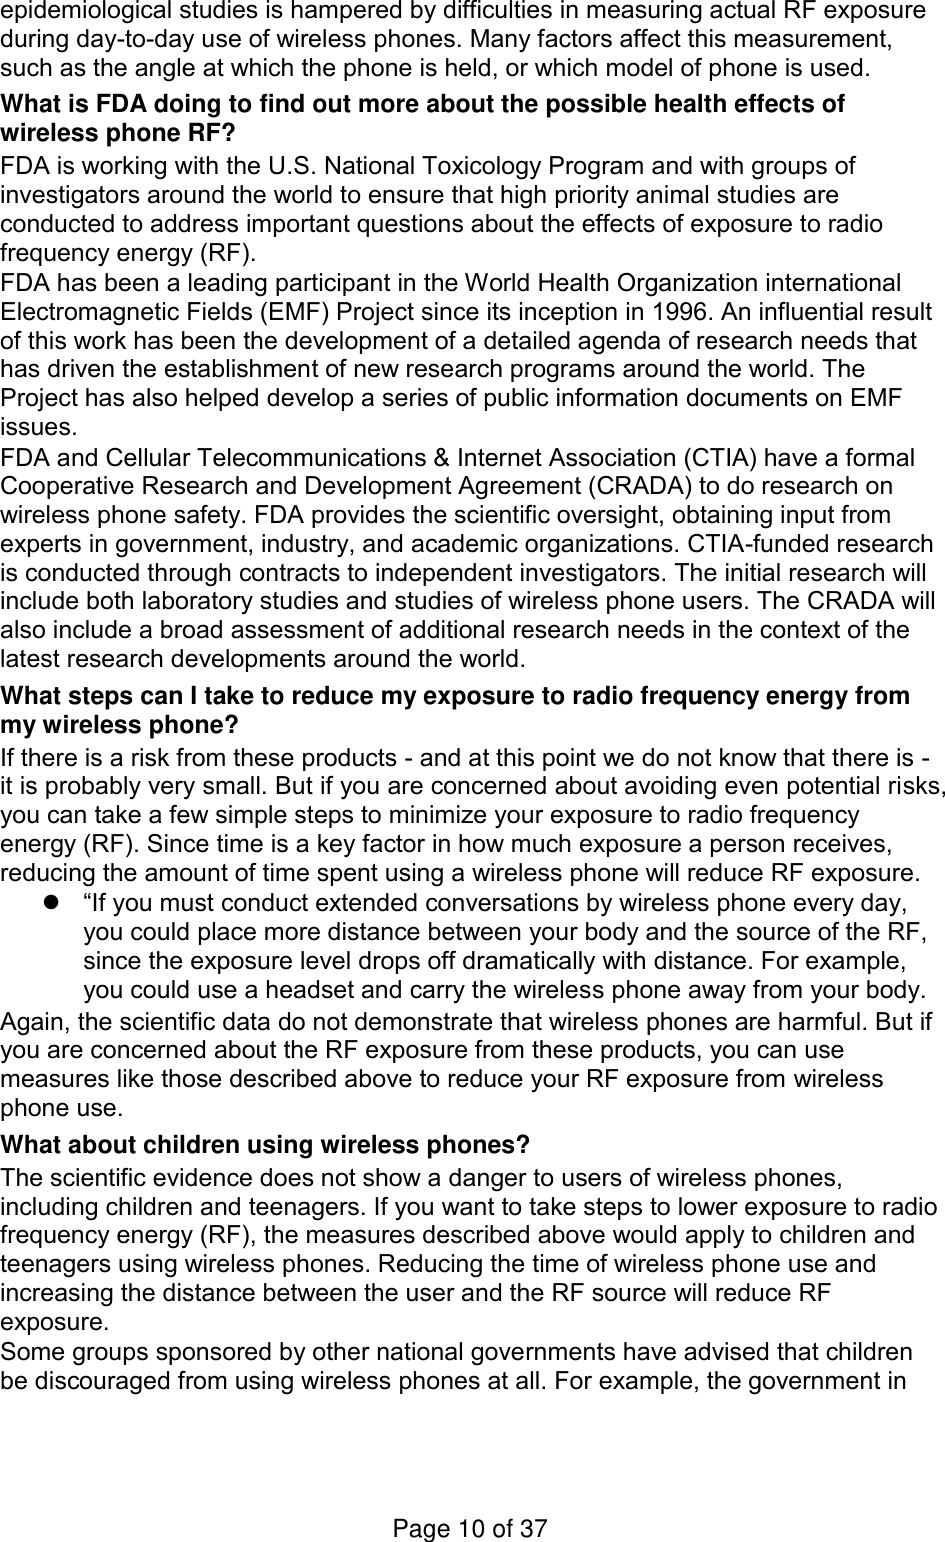 epidemiological studies is hampered by difficulties in measuring actual RF exposure during day-to-day use of wireless phones. Many factors affect this measurement, such as the angle at which the phone is held, or which model of phone is used. What is FDA doing to find out more about the possible health effects of wireless phone RF? FDA is working with the U.S. National Toxicology Program and with groups of investigators around the world to ensure that high priority animal studies are conducted to address important questions about the effects of exposure to radio frequency energy (RF). FDA has been a leading participant in the World Health Organization international Electromagnetic Fields (EMF) Project since its inception in 1996. An influential result of this work has been the development of a detailed agenda of research needs that has driven the establishment of new research programs around the world. The Project has also helped develop a series of public information documents on EMF issues. FDA and Cellular Telecommunications &amp; Internet Association (CTIA) have a formal Cooperative Research and Development Agreement (CRADA) to do research on wireless phone safety. FDA provides the scientific oversight, obtaining input from experts in government, industry, and academic organizations. CTIA-funded research is conducted through contracts to independent investigators. The initial research will include both laboratory studies and studies of wireless phone users. The CRADA will also include a broad assessment of additional research needs in the context of the latest research developments around the world. What steps can I take to reduce my exposure to radio frequency energy from my wireless phone? If there is a risk from these products - and at this point we do not know that there is - it is probably very small. But if you are concerned about avoiding even potential risks, you can take a few simple steps to minimize your exposure to radio frequency energy (RF). Since time is a key factor in how much exposure a person receives, reducing the amount of time spent using a wireless phone will reduce RF exposure.  “If you must conduct extended conversations by wireless phone every day, you could place more distance between your body and the source of the RF, since the exposure level drops off dramatically with distance. For example, you could use a headset and carry the wireless phone away from your body. Again, the scientific data do not demonstrate that wireless phones are harmful. But if you are concerned about the RF exposure from these products, you can use measures like those described above to reduce your RF exposure from wireless phone use. What about children using wireless phones? The scientific evidence does not show a danger to users of wireless phones, including children and teenagers. If you want to take steps to lower exposure to radio frequency energy (RF), the measures described above would apply to children and teenagers using wireless phones. Reducing the time of wireless phone use and increasing the distance between the user and the RF source will reduce RF exposure. Some groups sponsored by other national governments have advised that children be discouraged from using wireless phones at all. For example, the government in Page 10 of 37